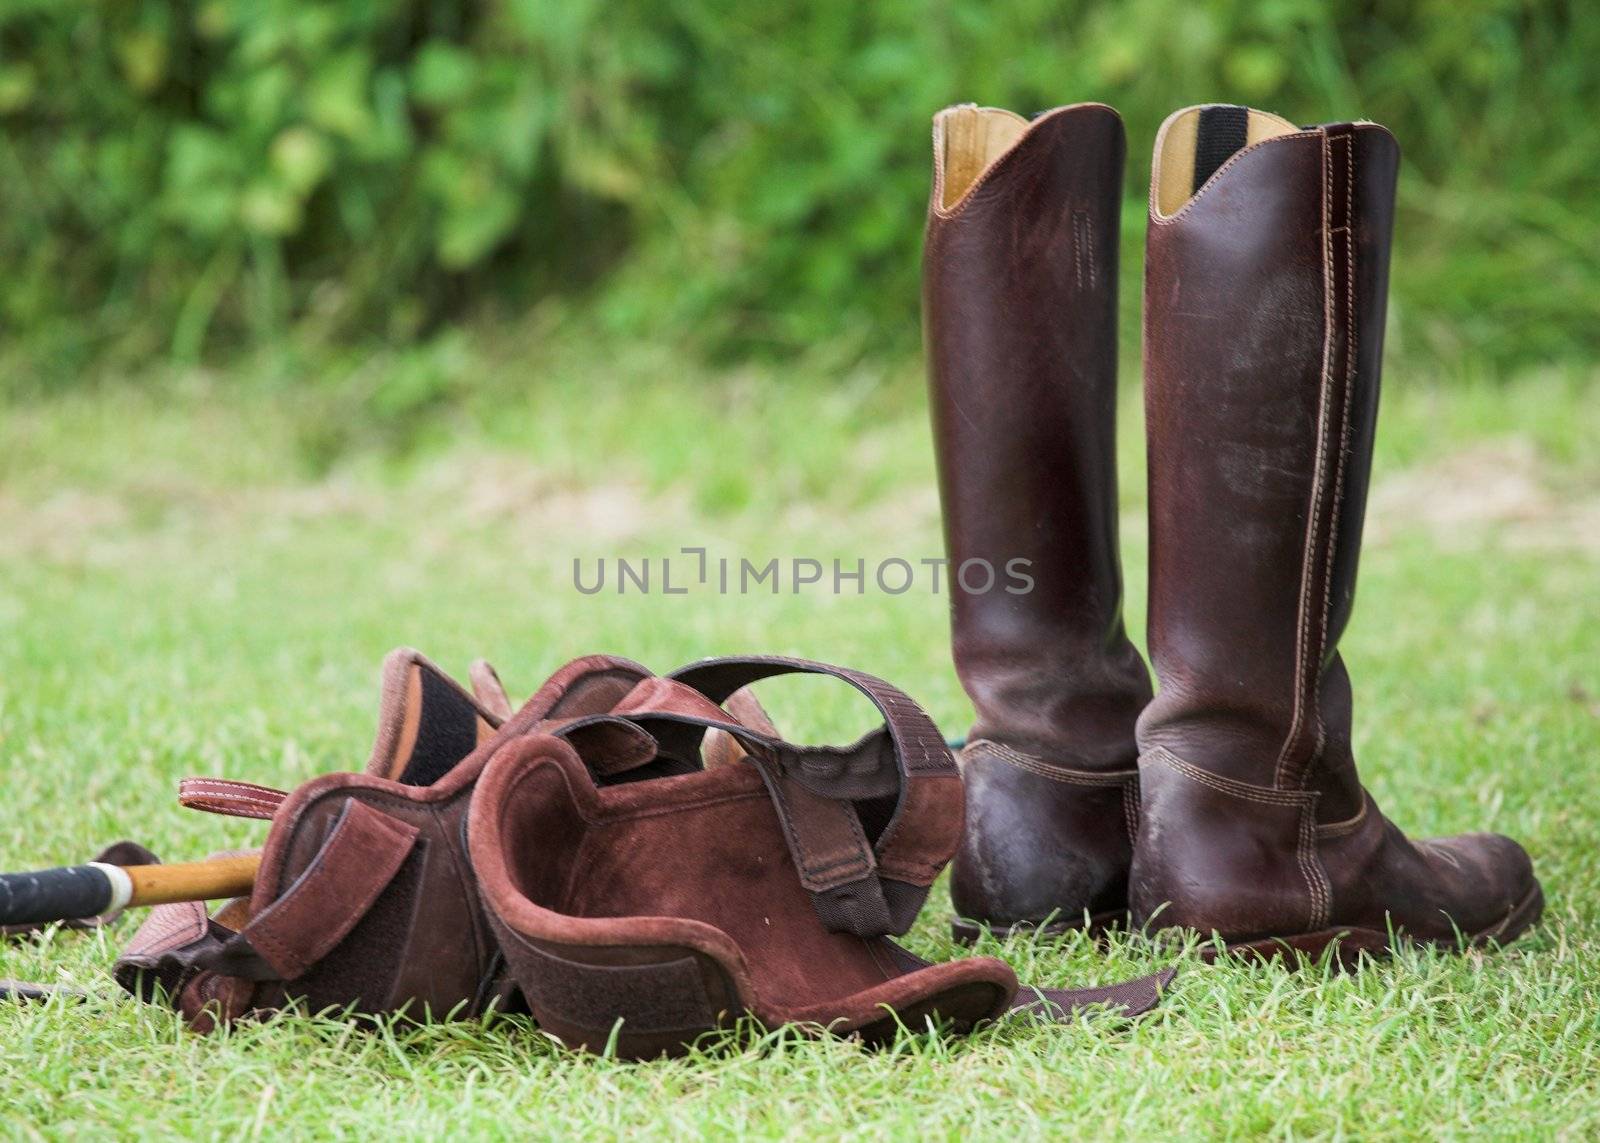 Pair of riding boots and knee protectors, ready for a game of polo.